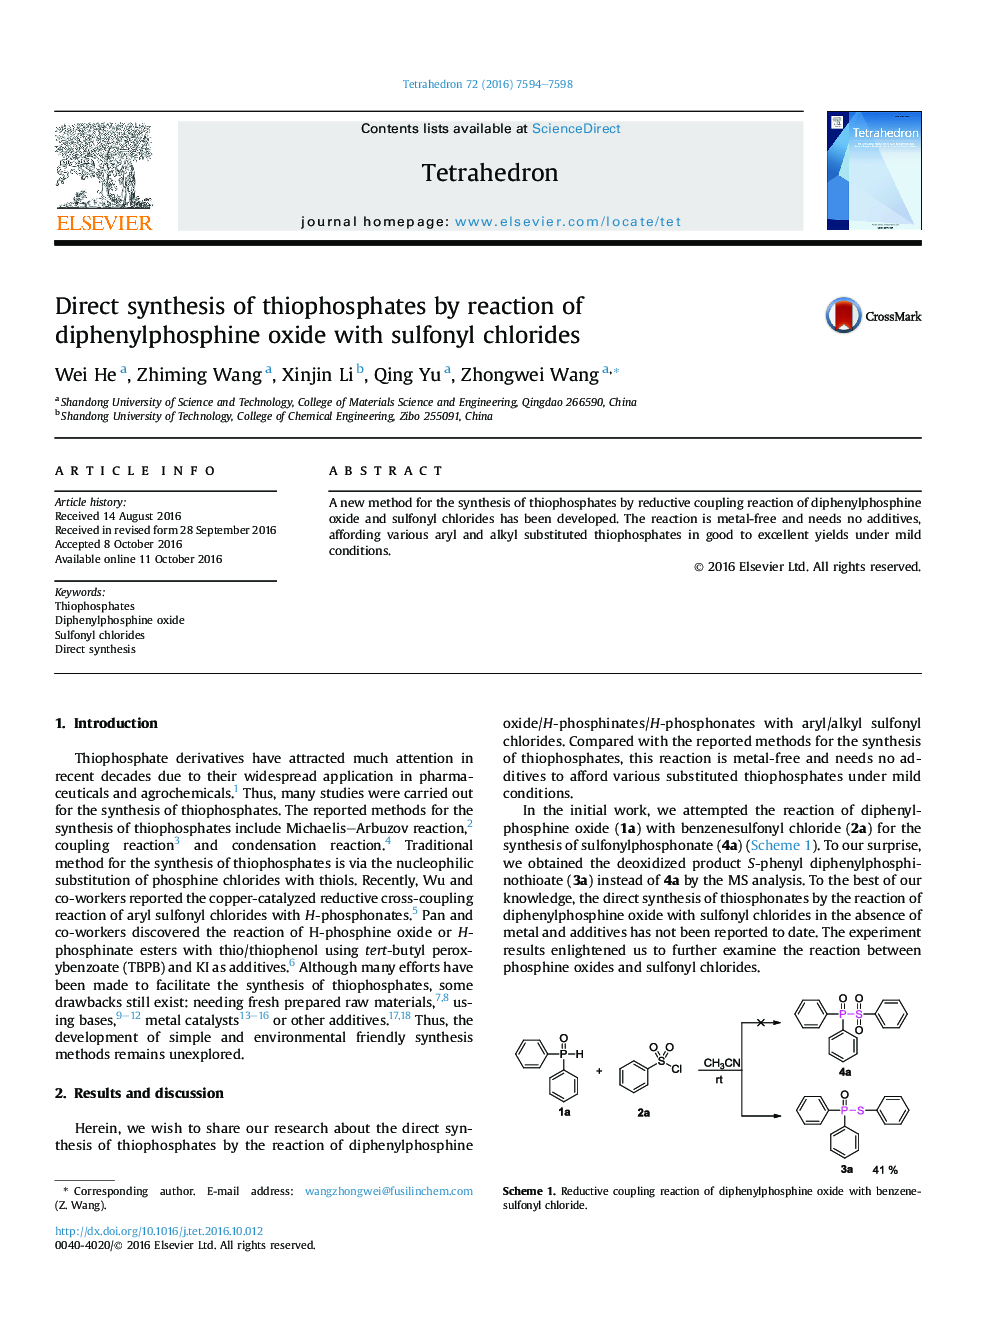 Direct synthesis of thiophosphates by reaction of diphenylphosphine oxide with sulfonyl chlorides